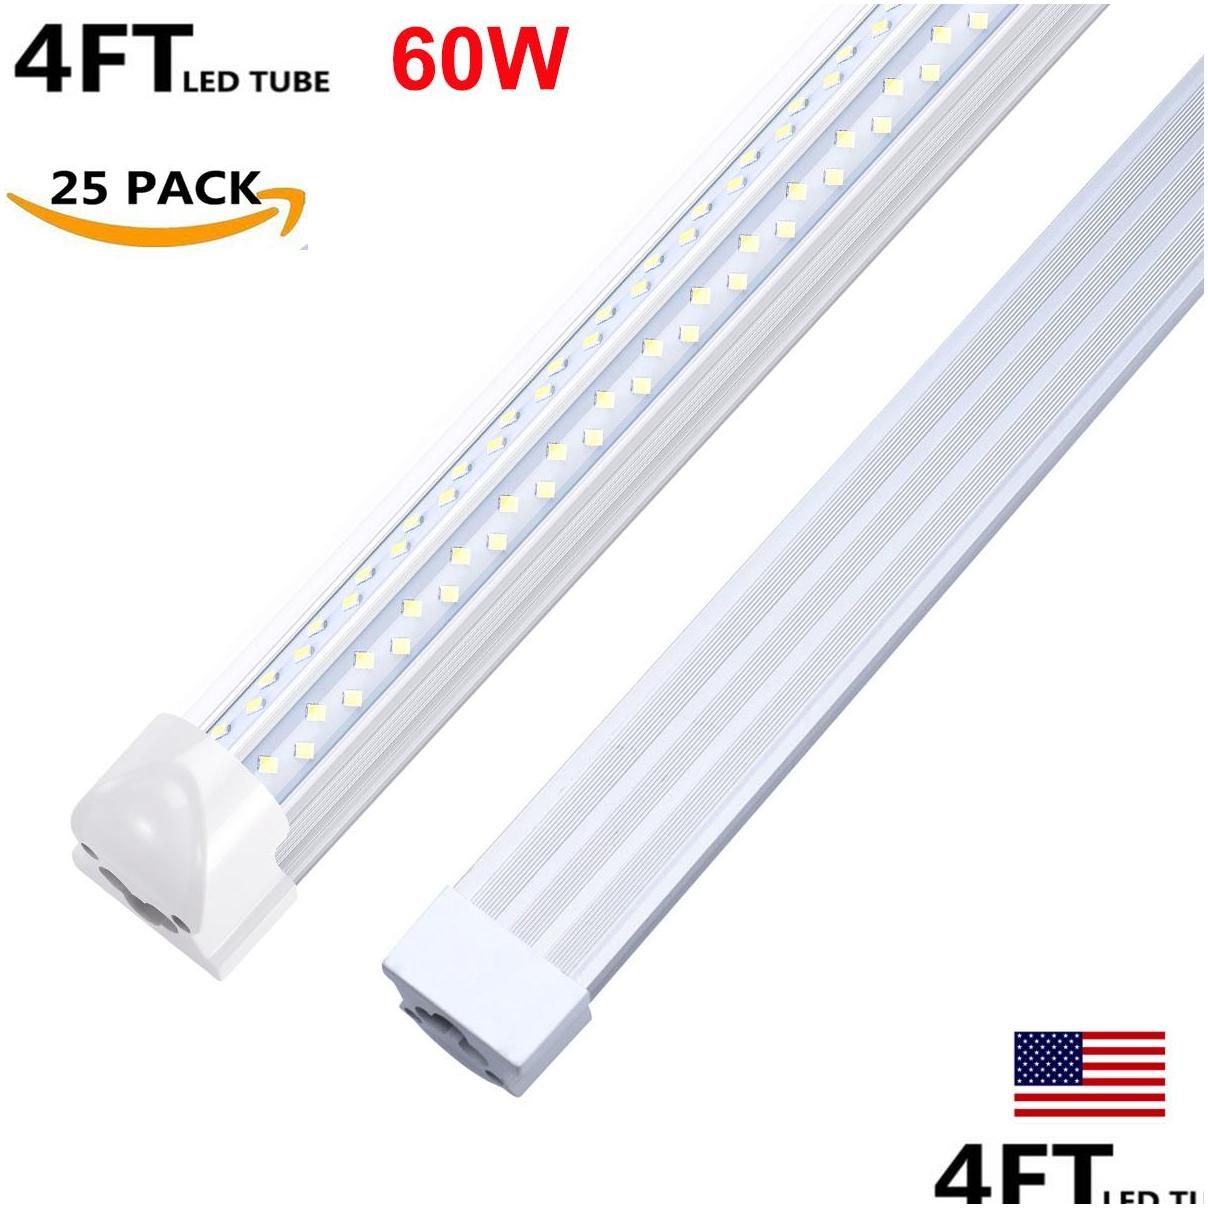 4Ft 60W V 4 Rows Clear Cover